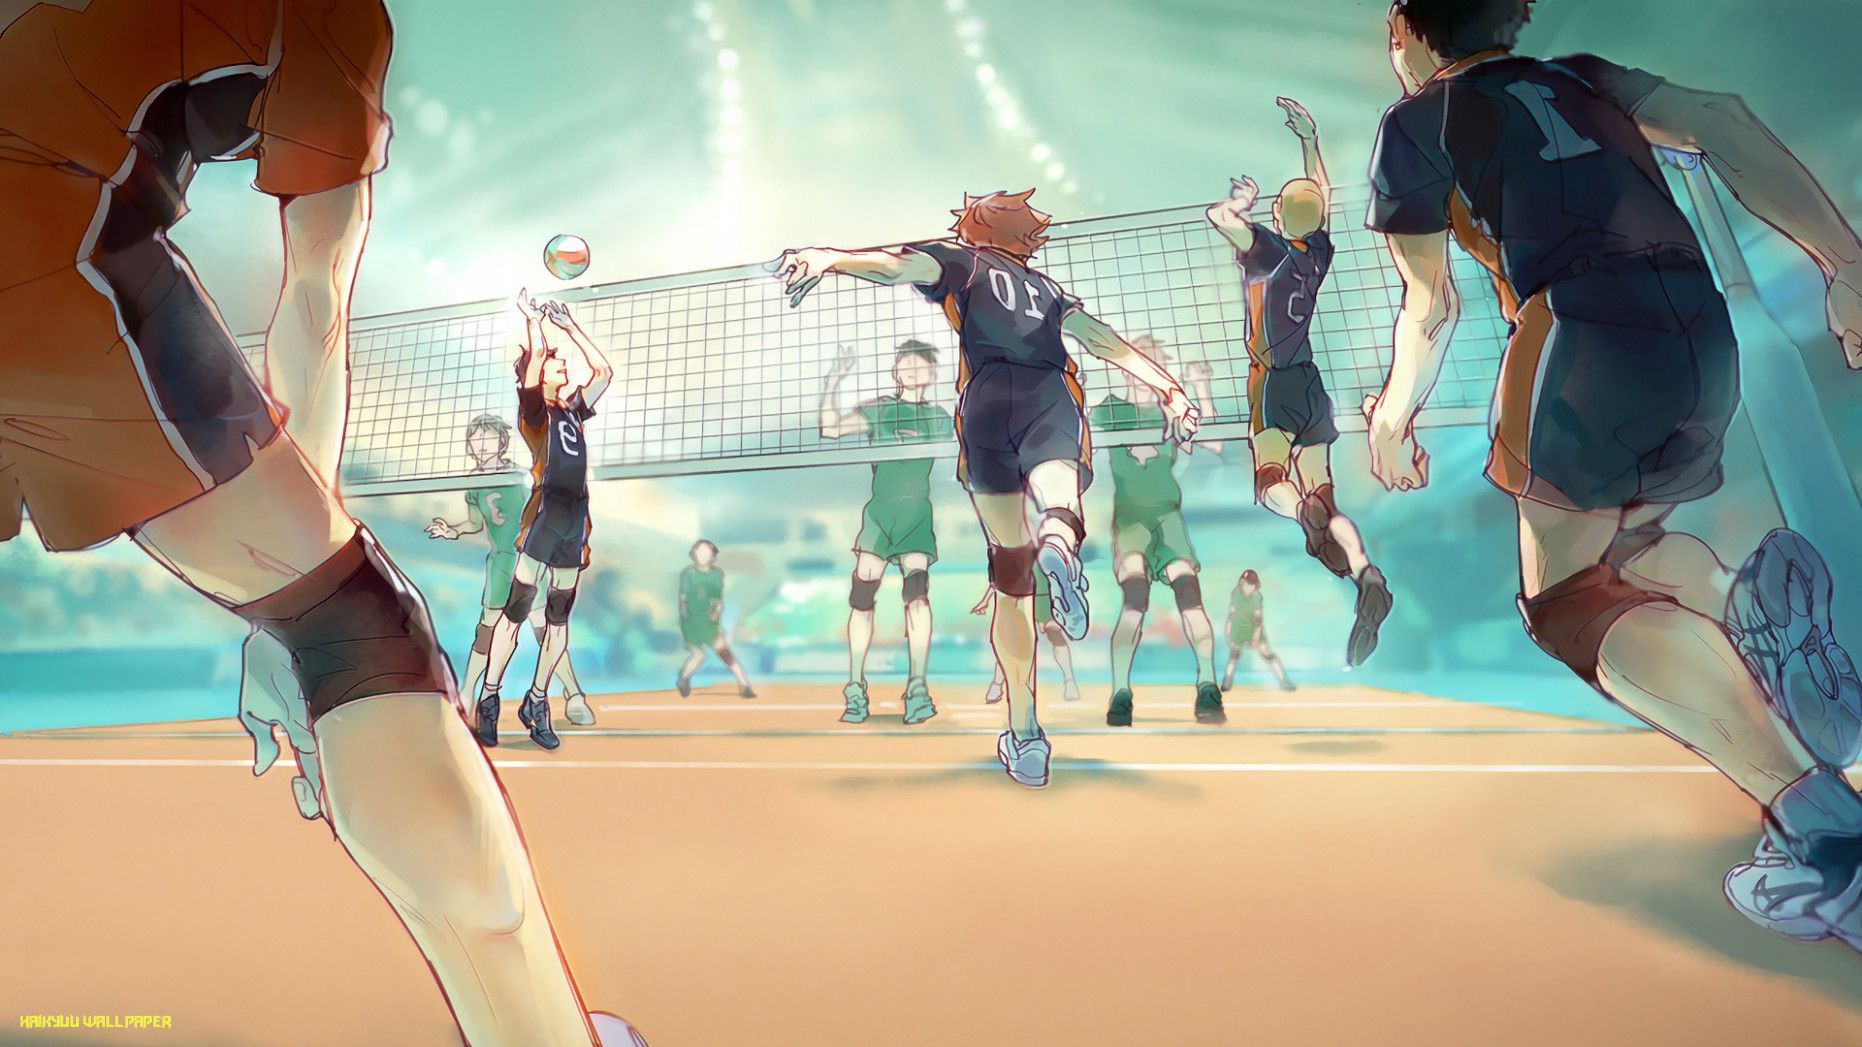 Reasons Why Haikyuu Wallpaper Is Getting More Popular In The Past Decade